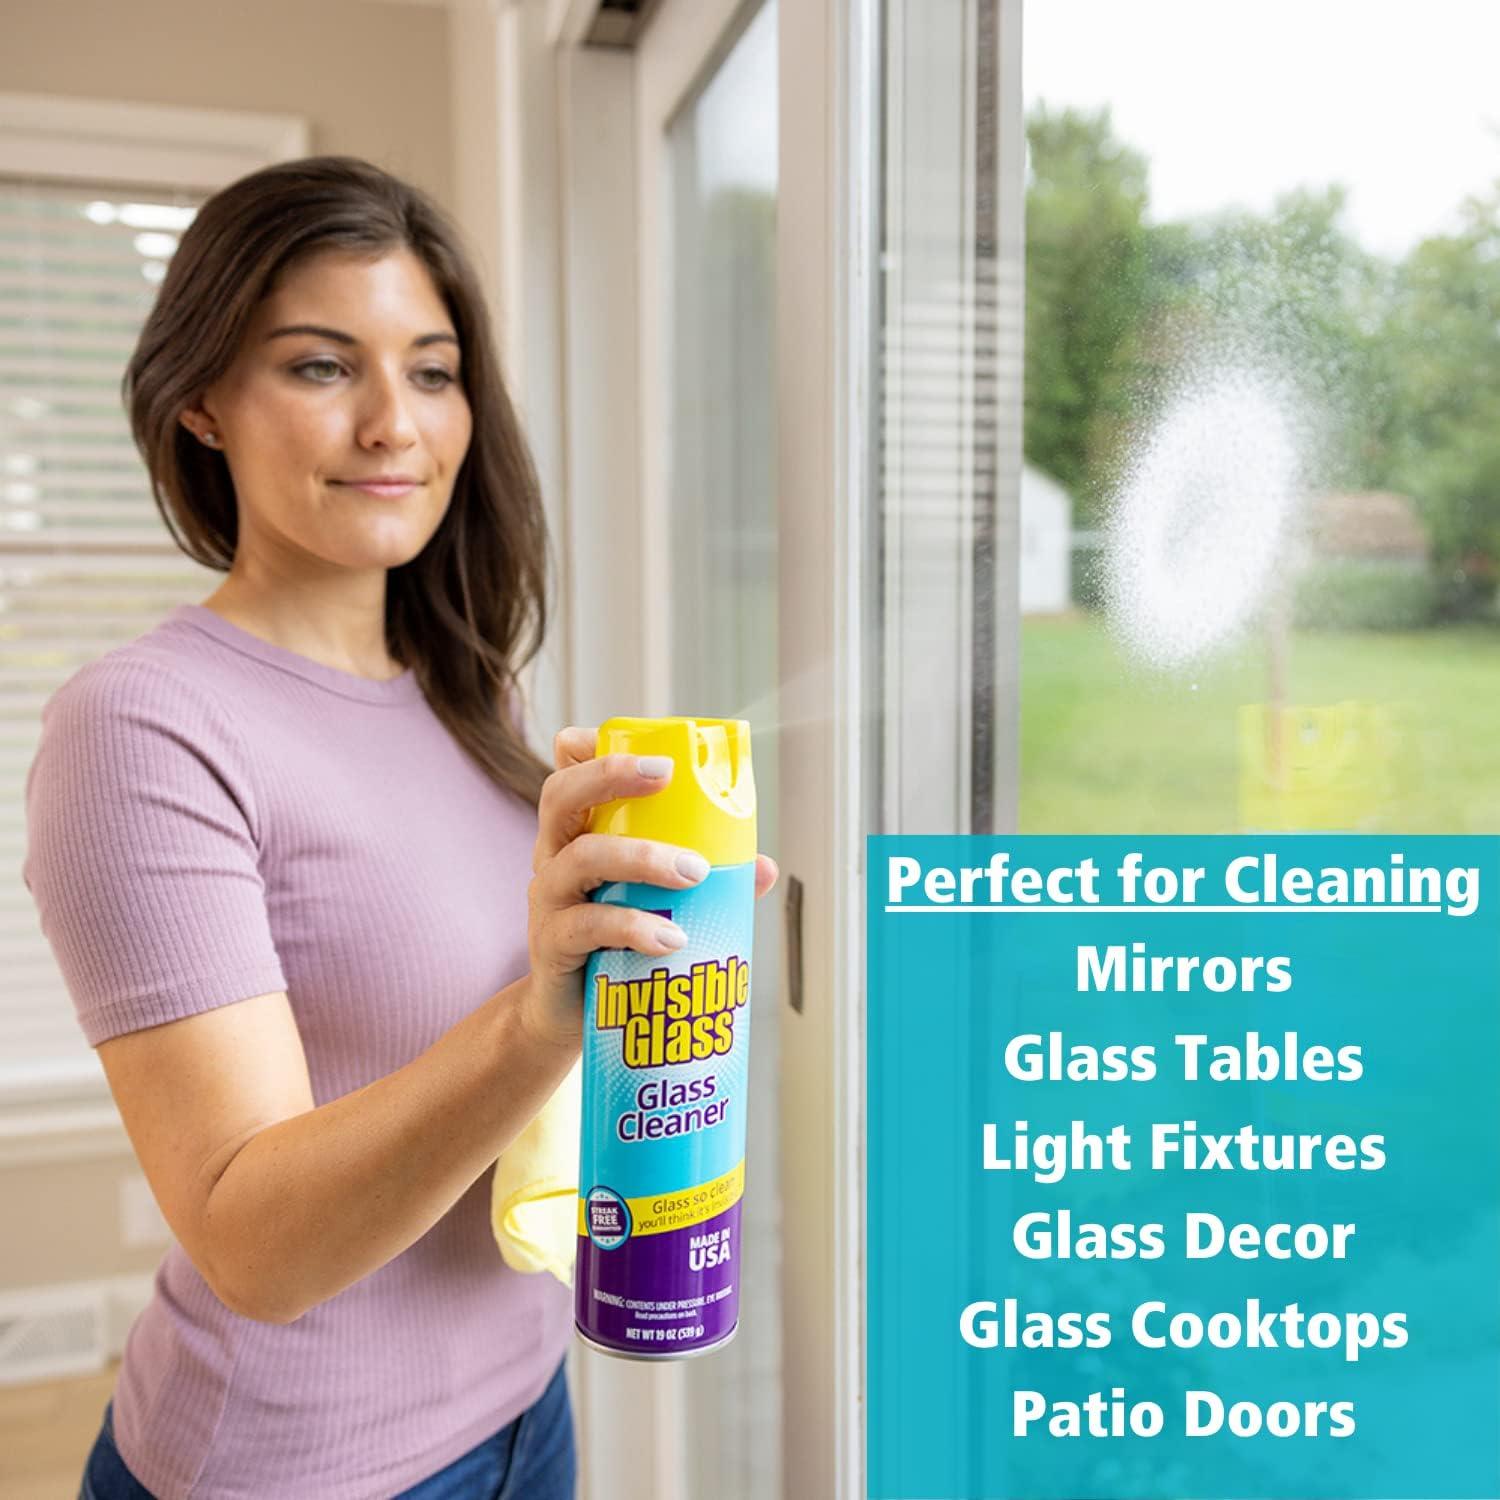 Invisible Glass 91160 Premium Glass and Window Cleaner Aerosol Can